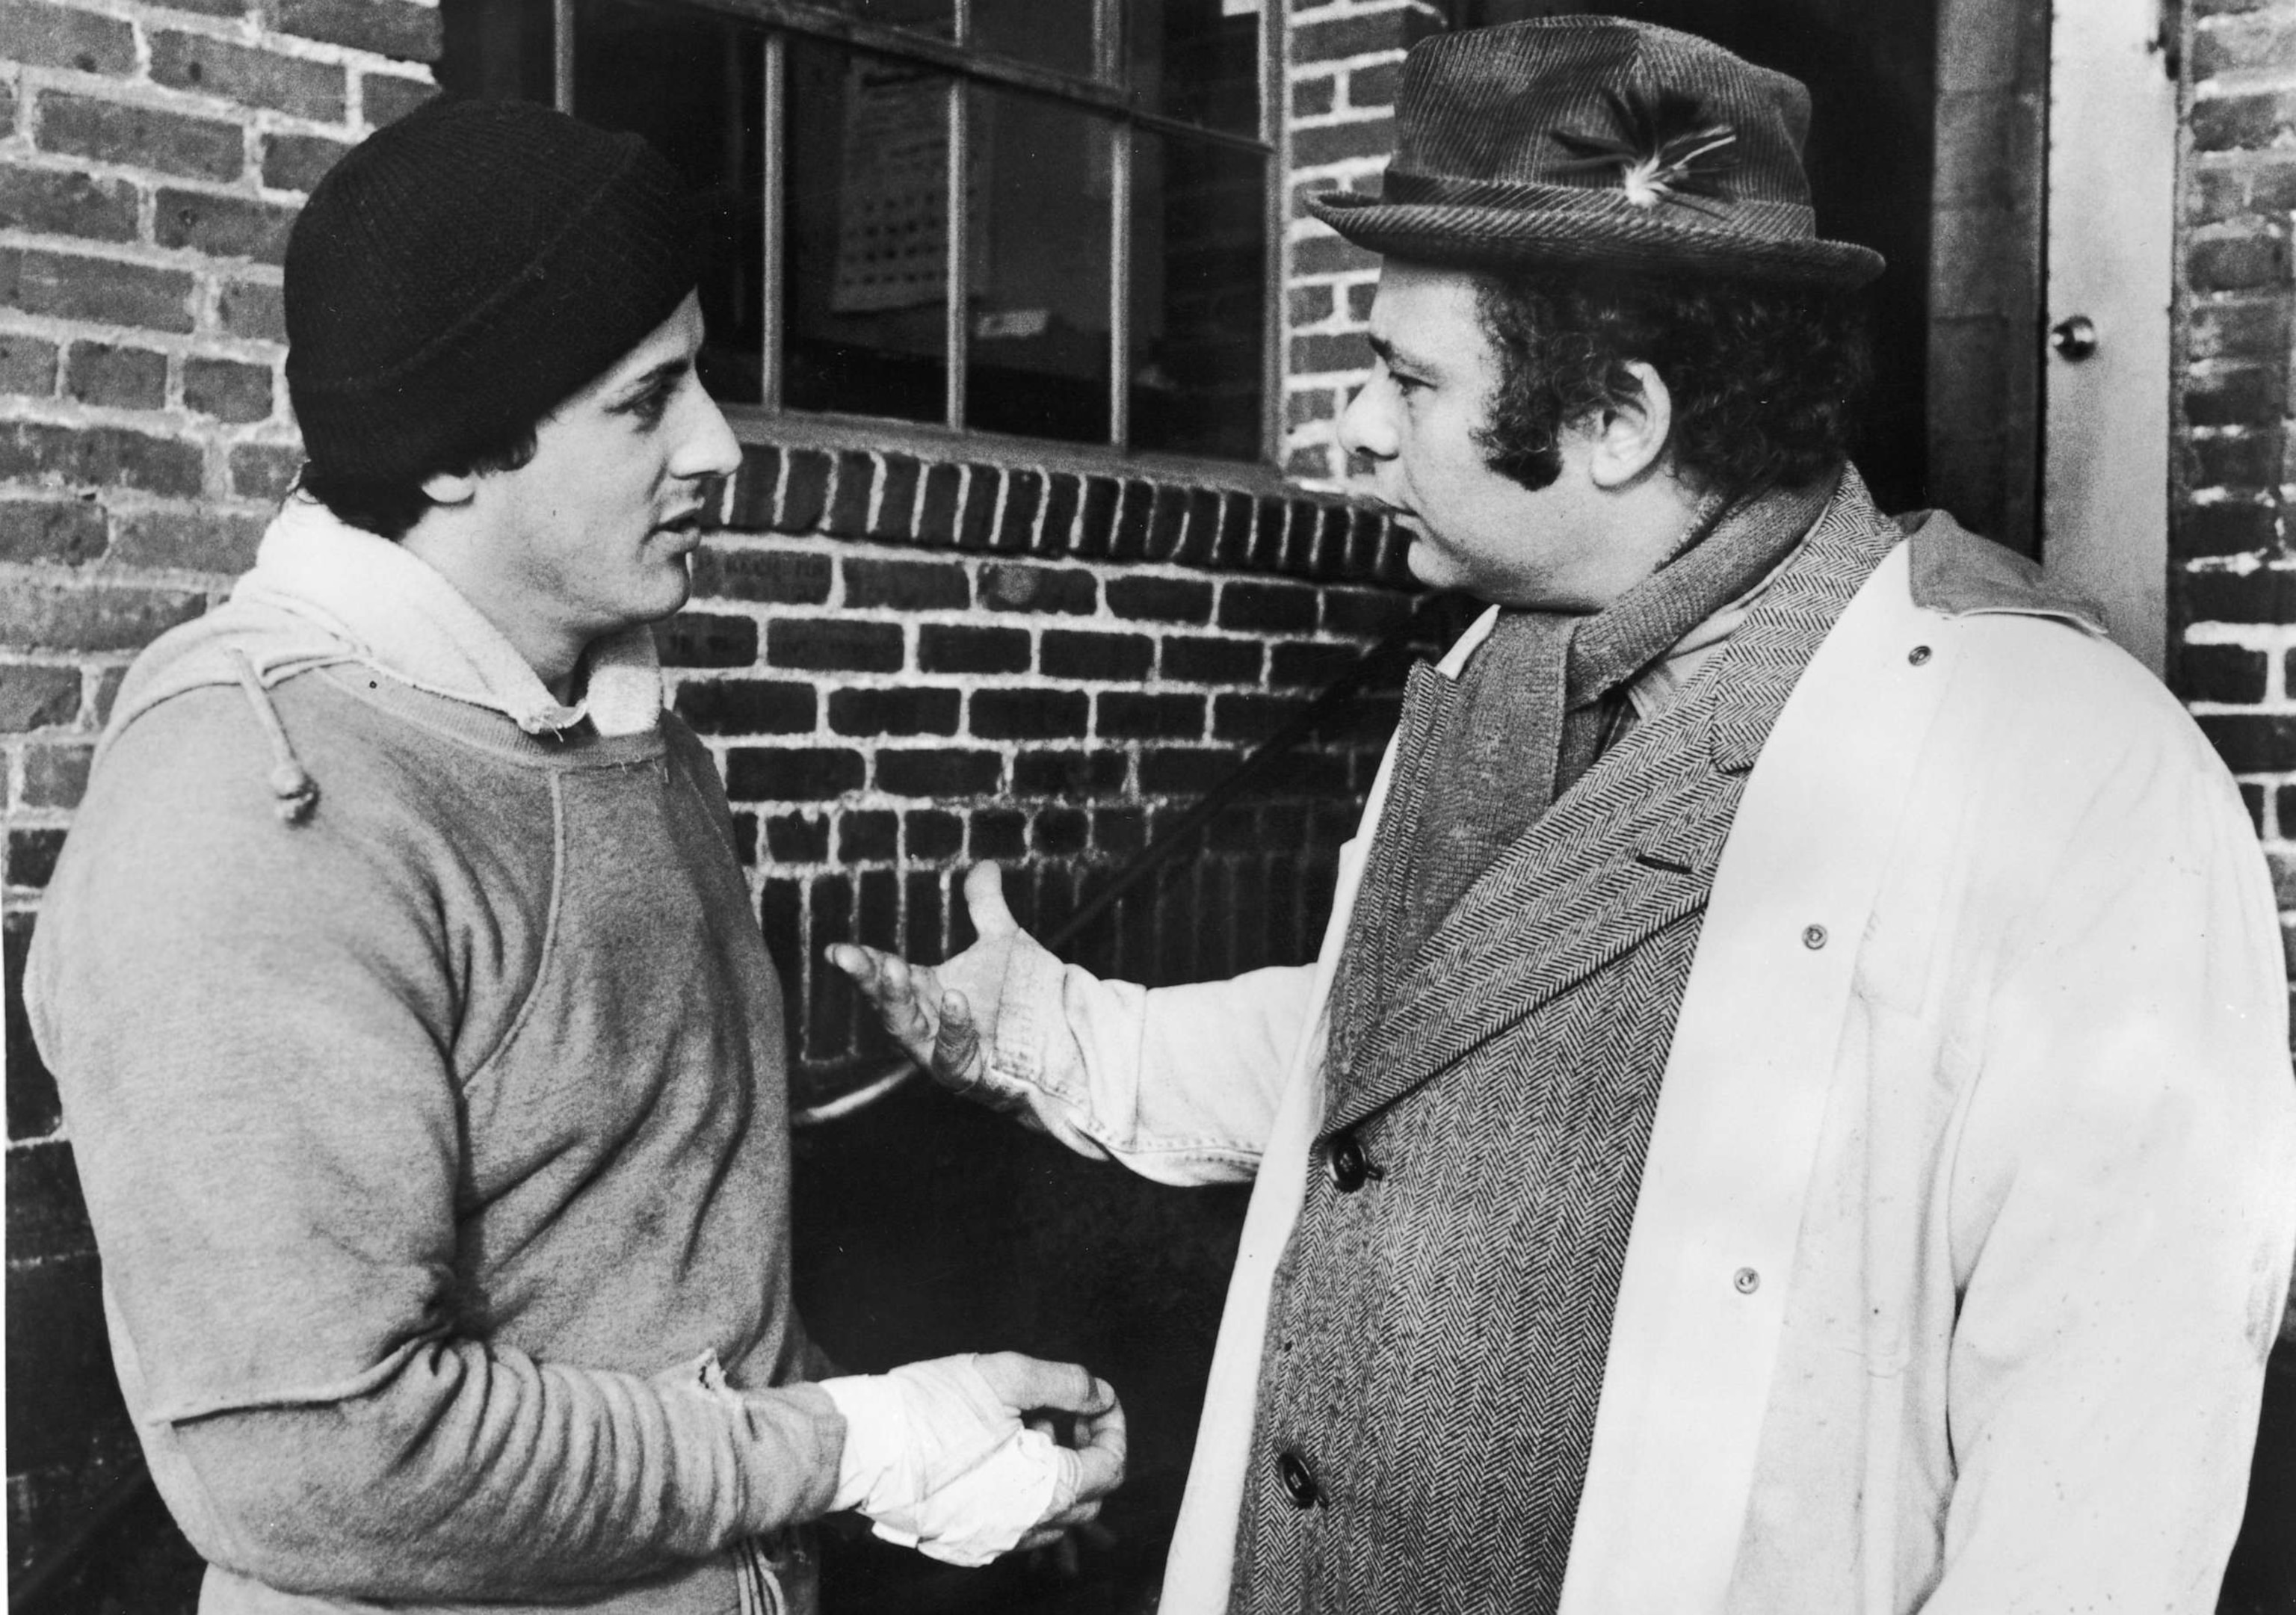 PHOTO: American actors Sylvester Stallone (L), wearing training clothes, and Burt Young talk outdoors in a still from the film, 'Rocky,' directed by John G. Avildsen, 1976. (Photo by United Artists/Courtesy of Getty Images)